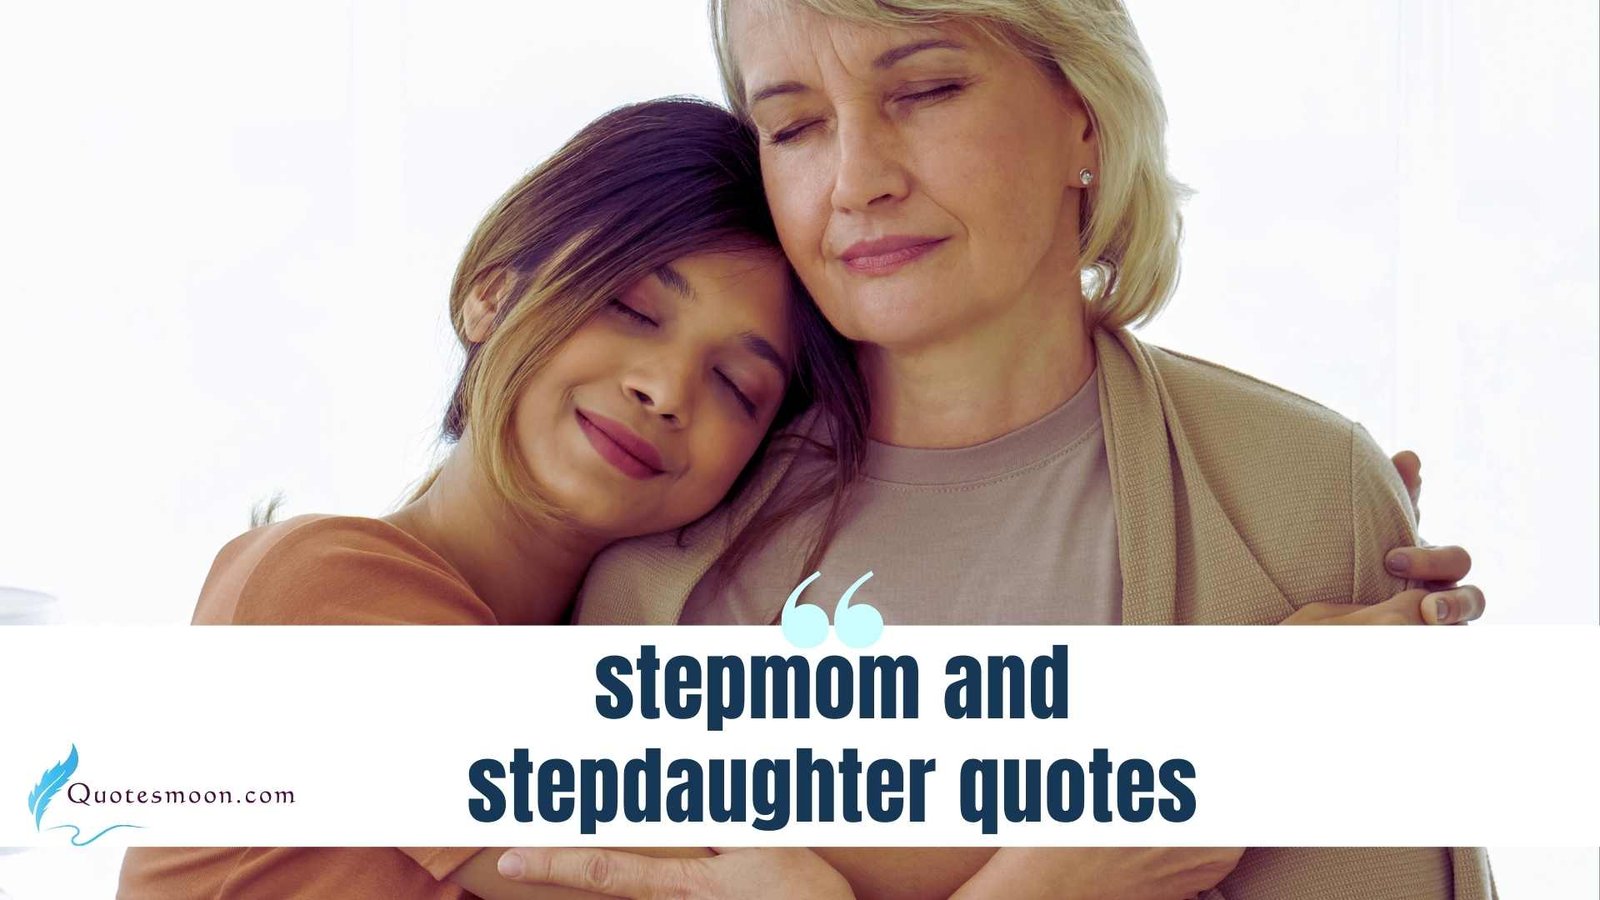 Stepmom And Stepdaughter Quotes images